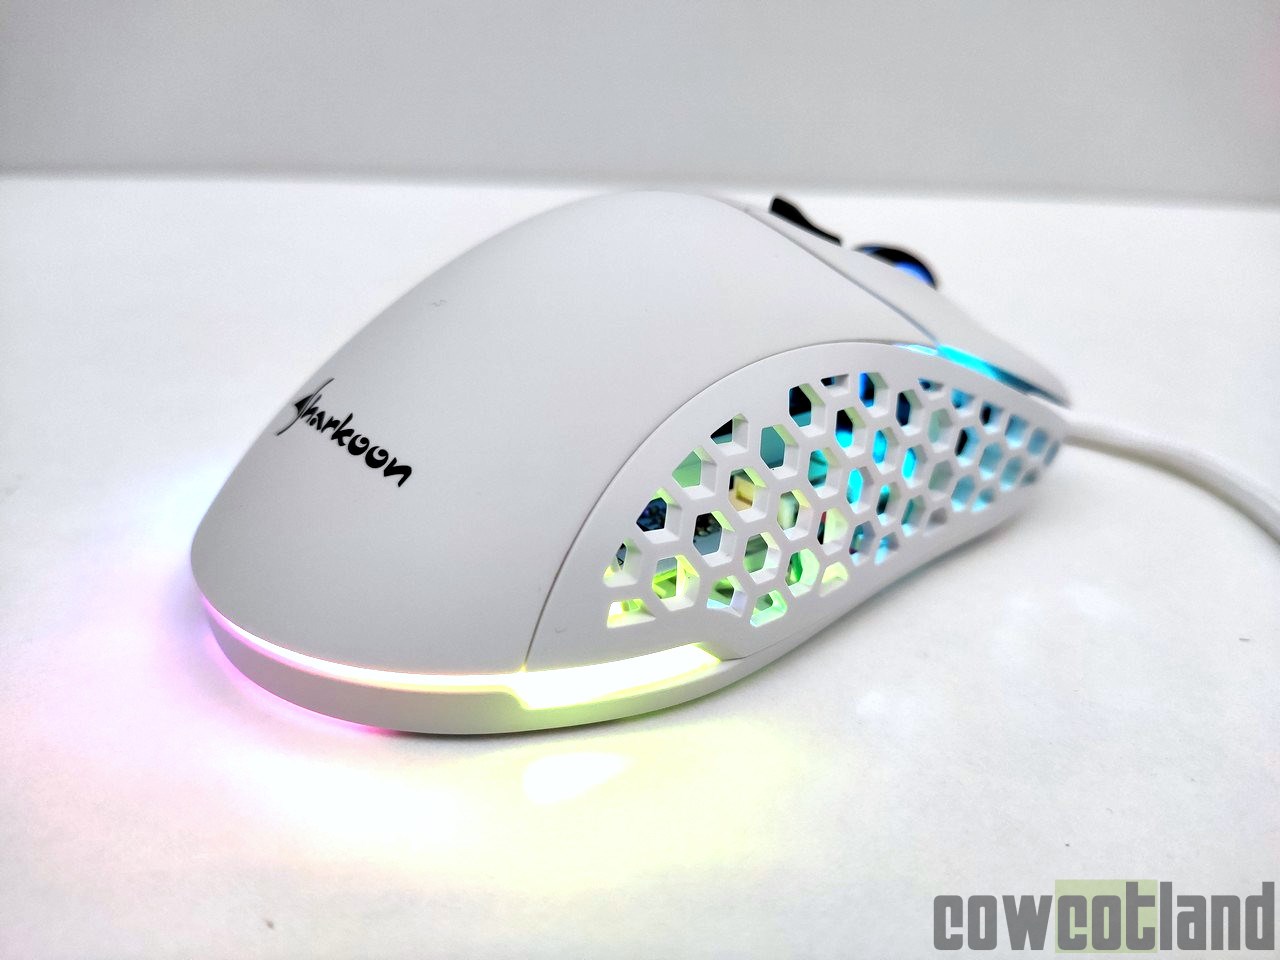 Image 43509, galerie Test souris Gaming Sharkoon Light 200 : Zowie-Killer ?